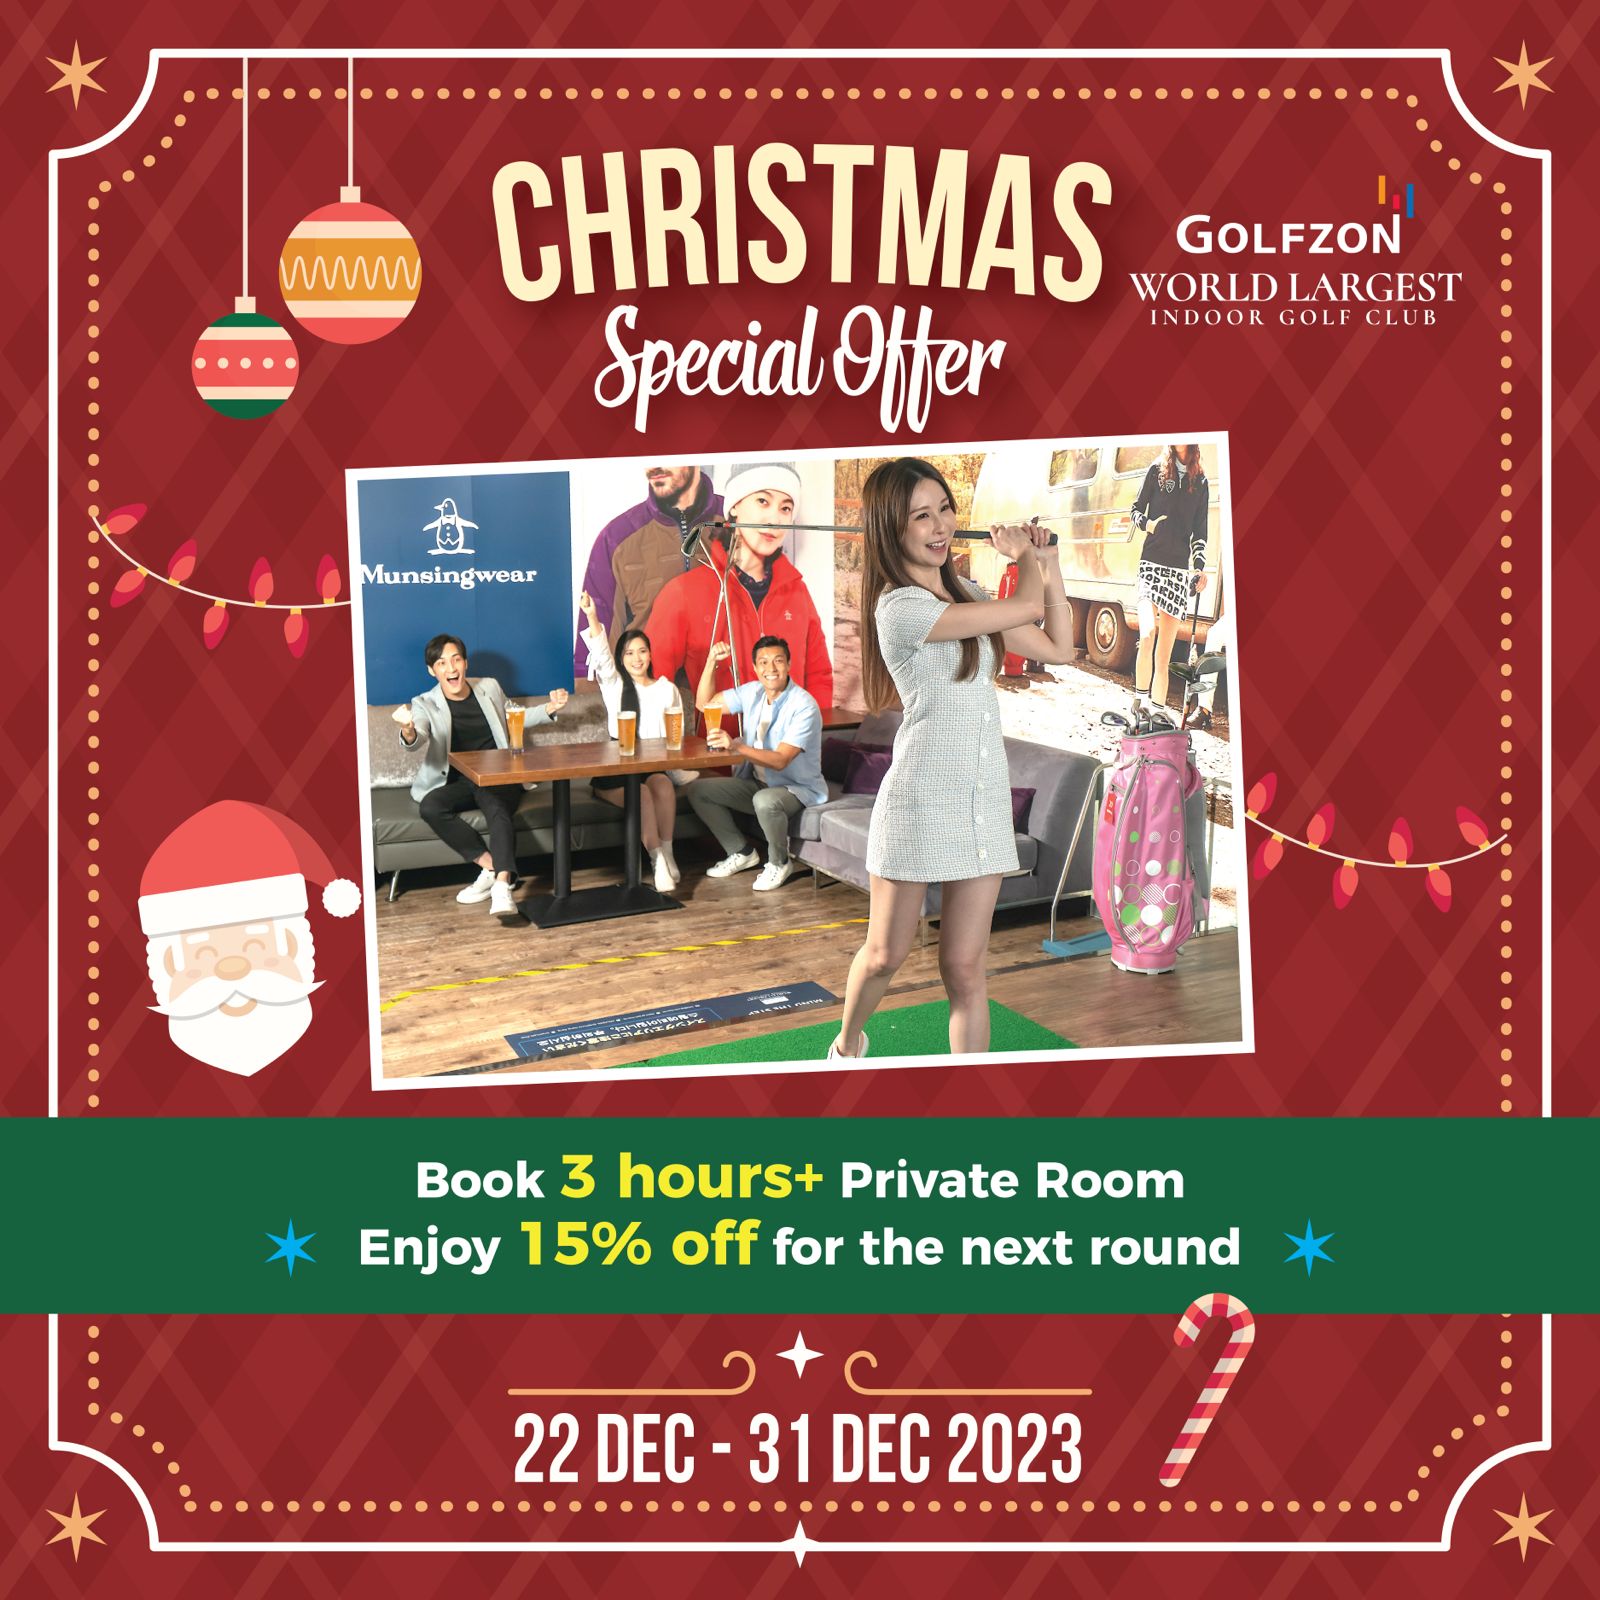 [Special Edition] Christmas Offer